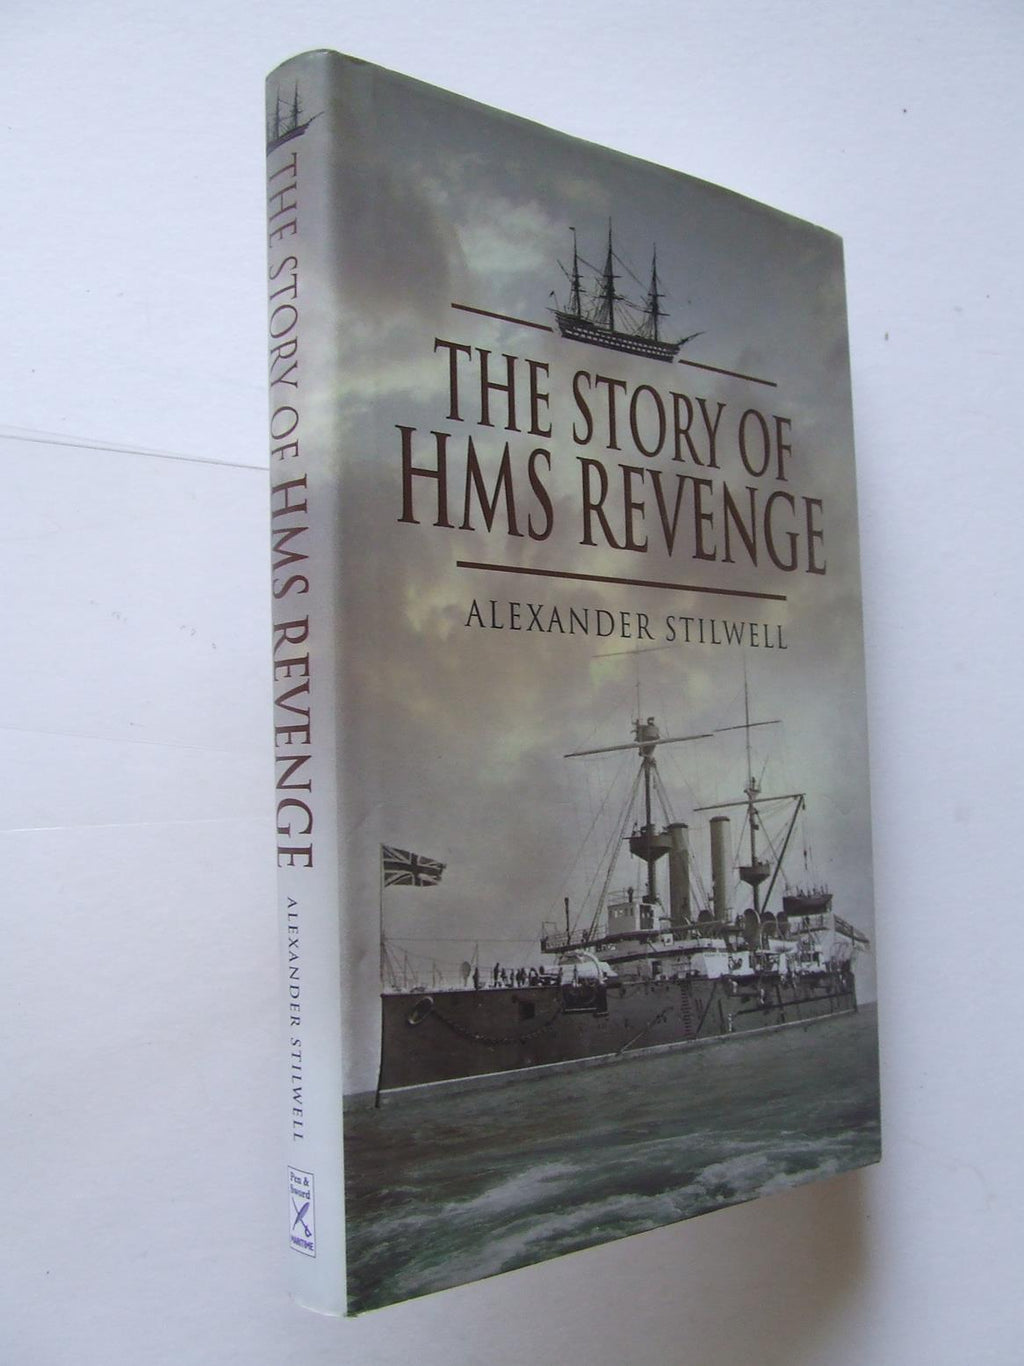 The Story of HMS Revenge, a ship in time